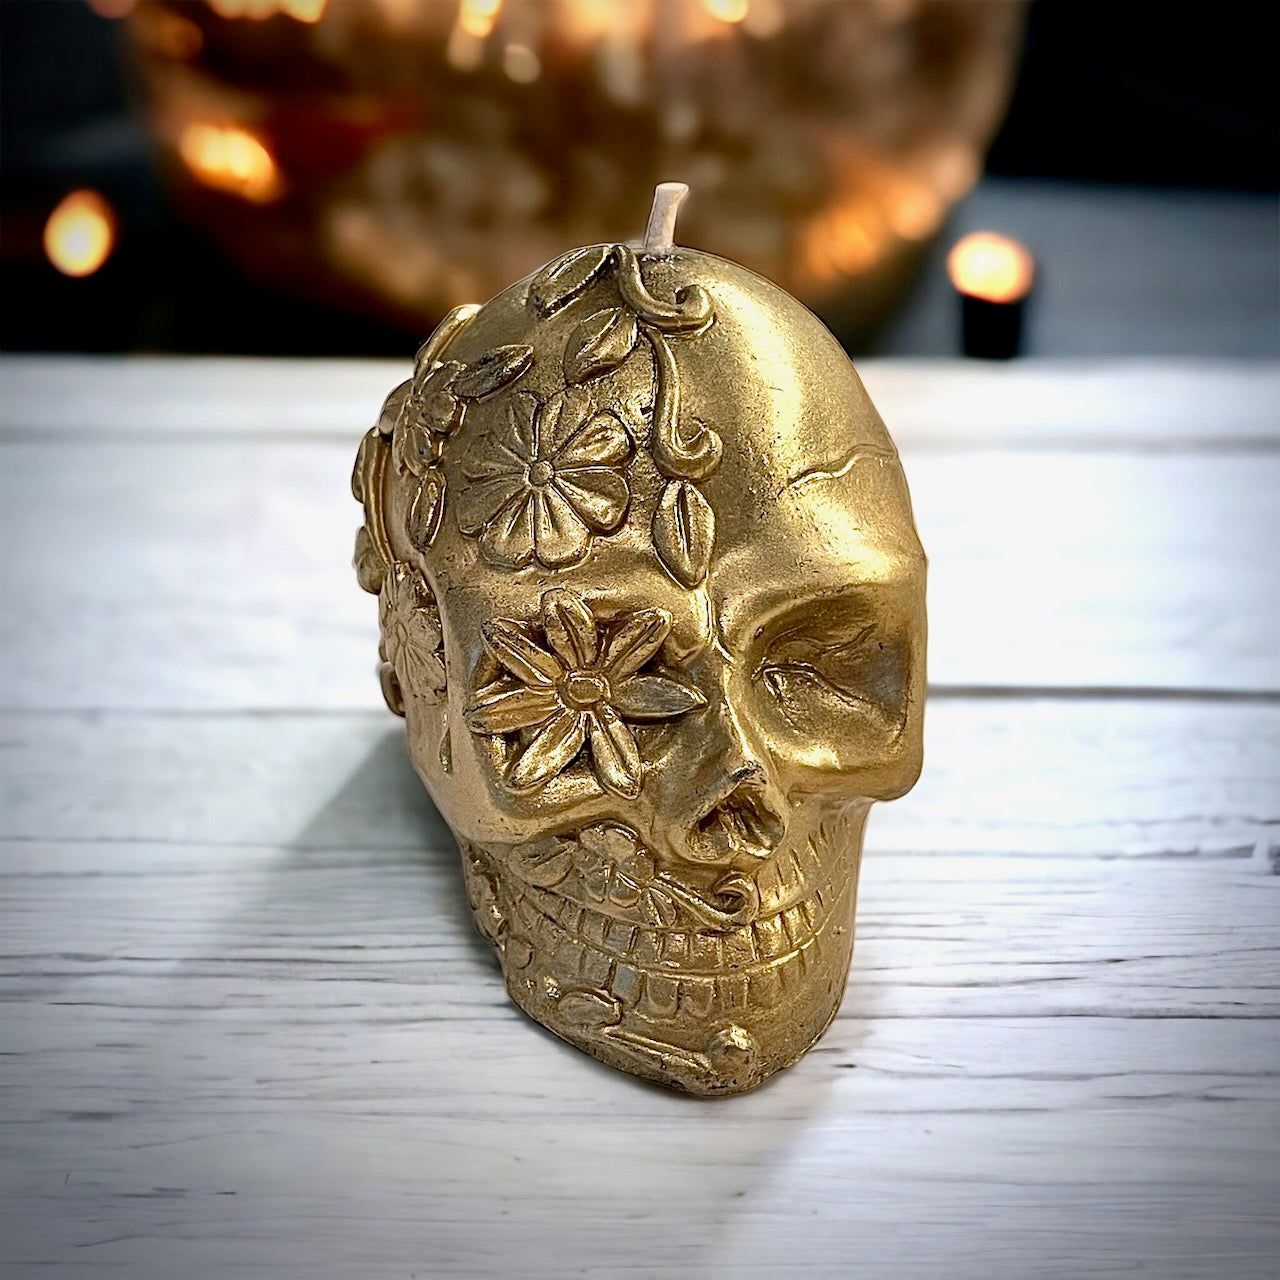 Golden Skull Pumpkin Spice Scented Candle with Black Wax